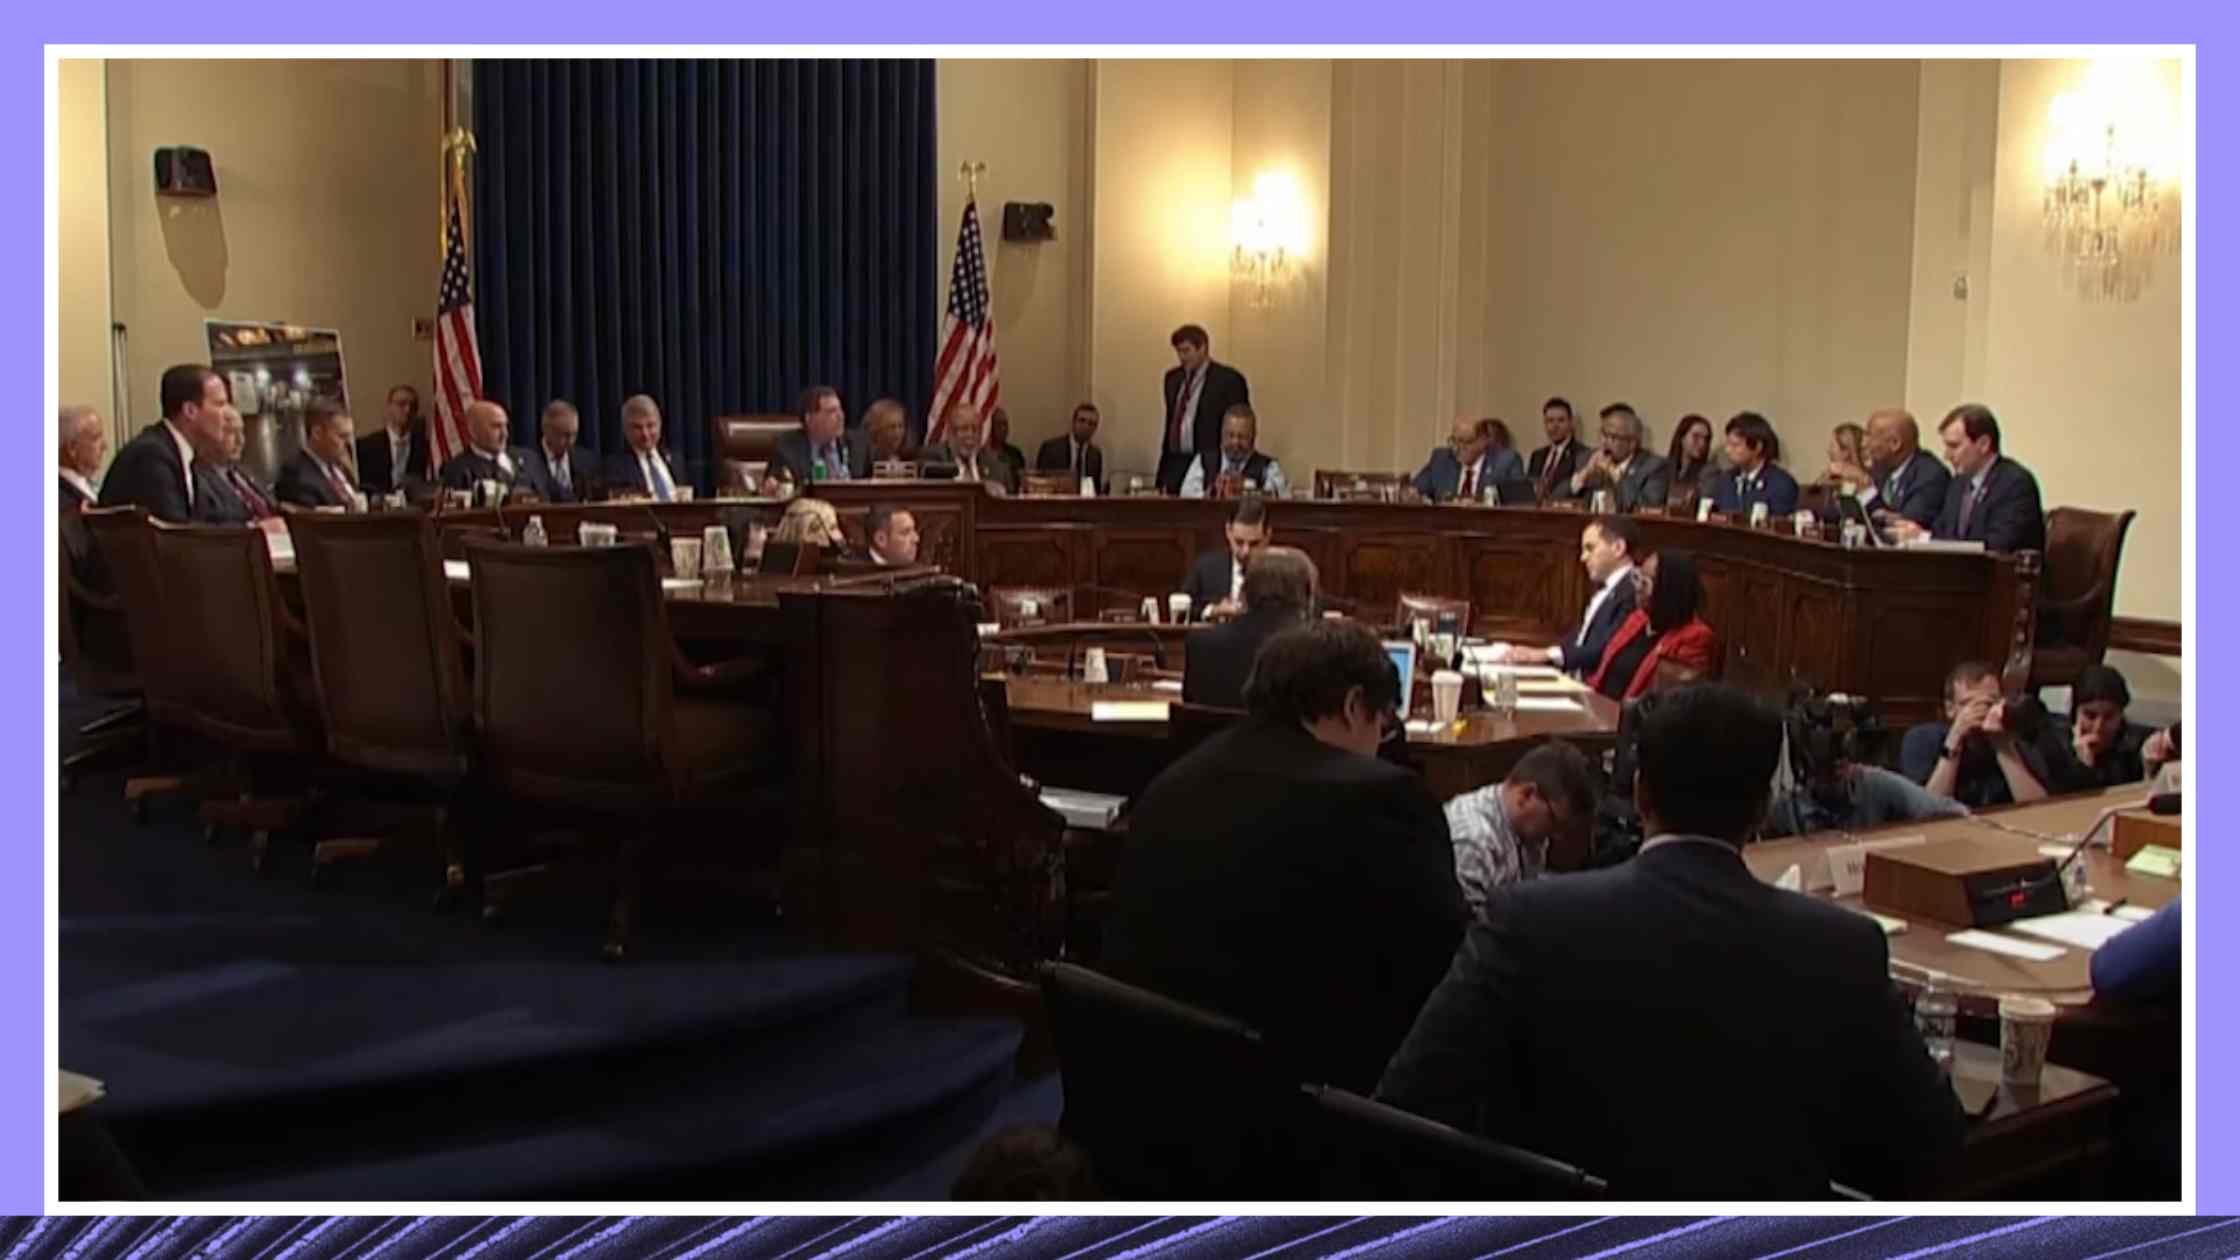 House Hearing on “Threats to the Homeland” with DHS Transcript